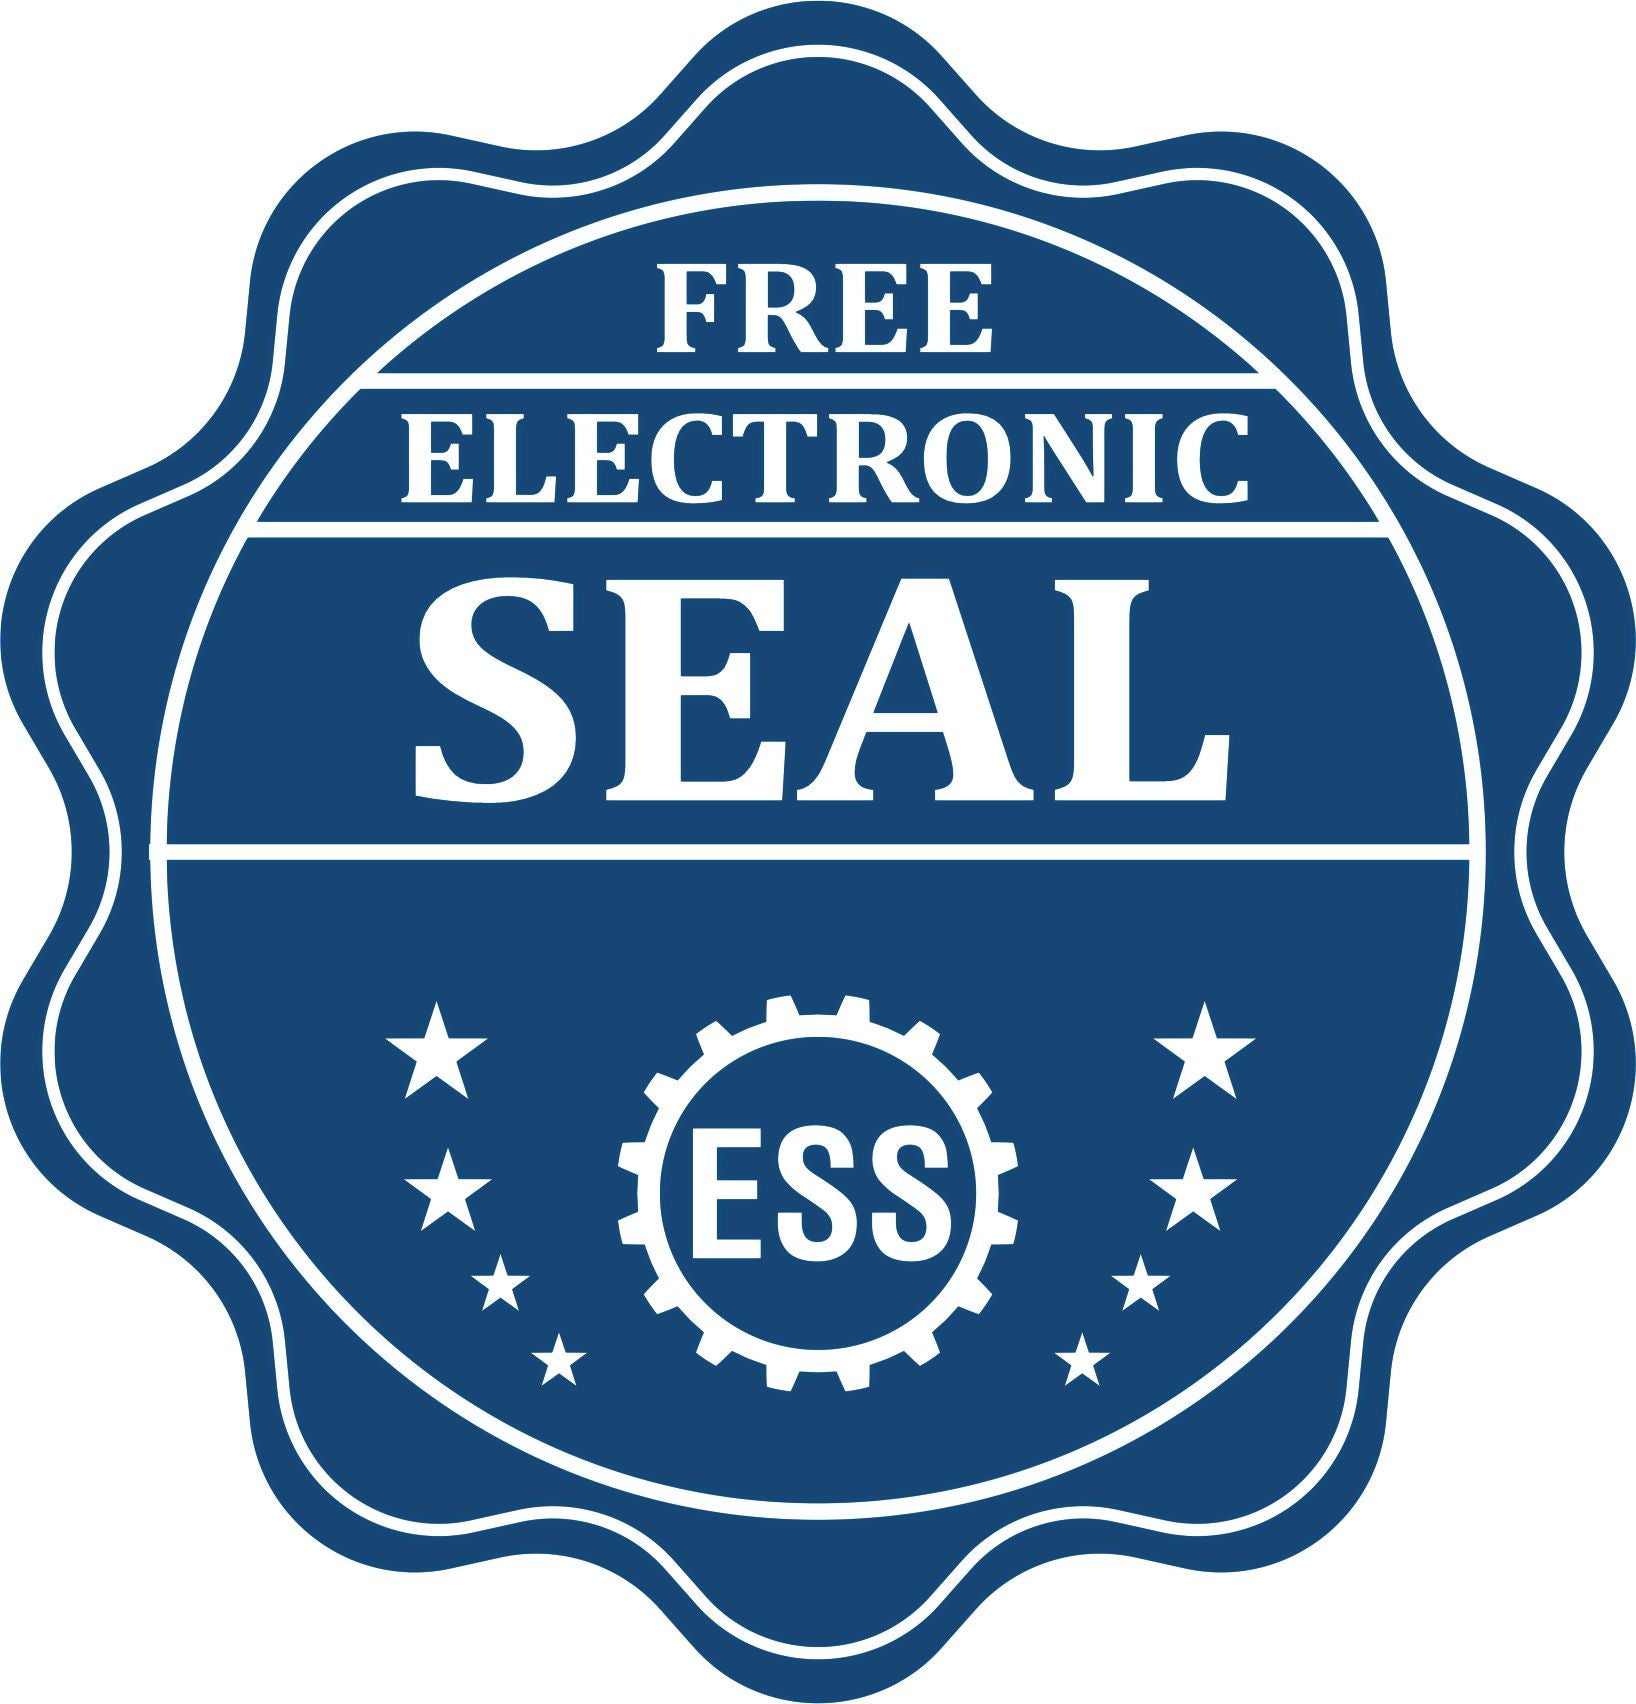 A badge showing a free electronic seal for the Slim Pre-Inked Minnesota Landscape Architect Seal Stamp with stars and the ESS gear on the emblem.